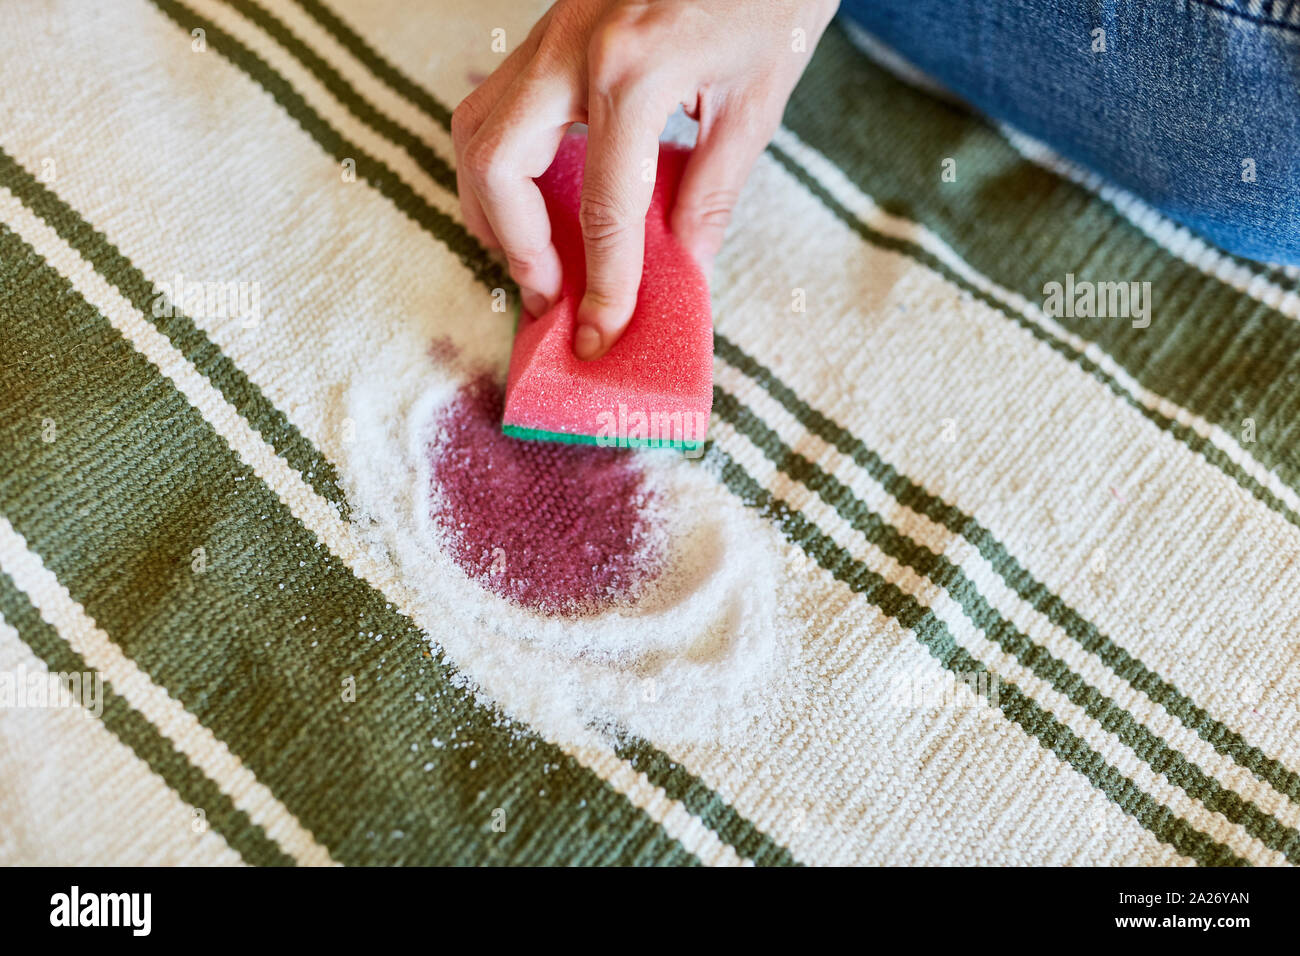 Hand with sponge while removing red wine stains with salt on carpet Stock Photo